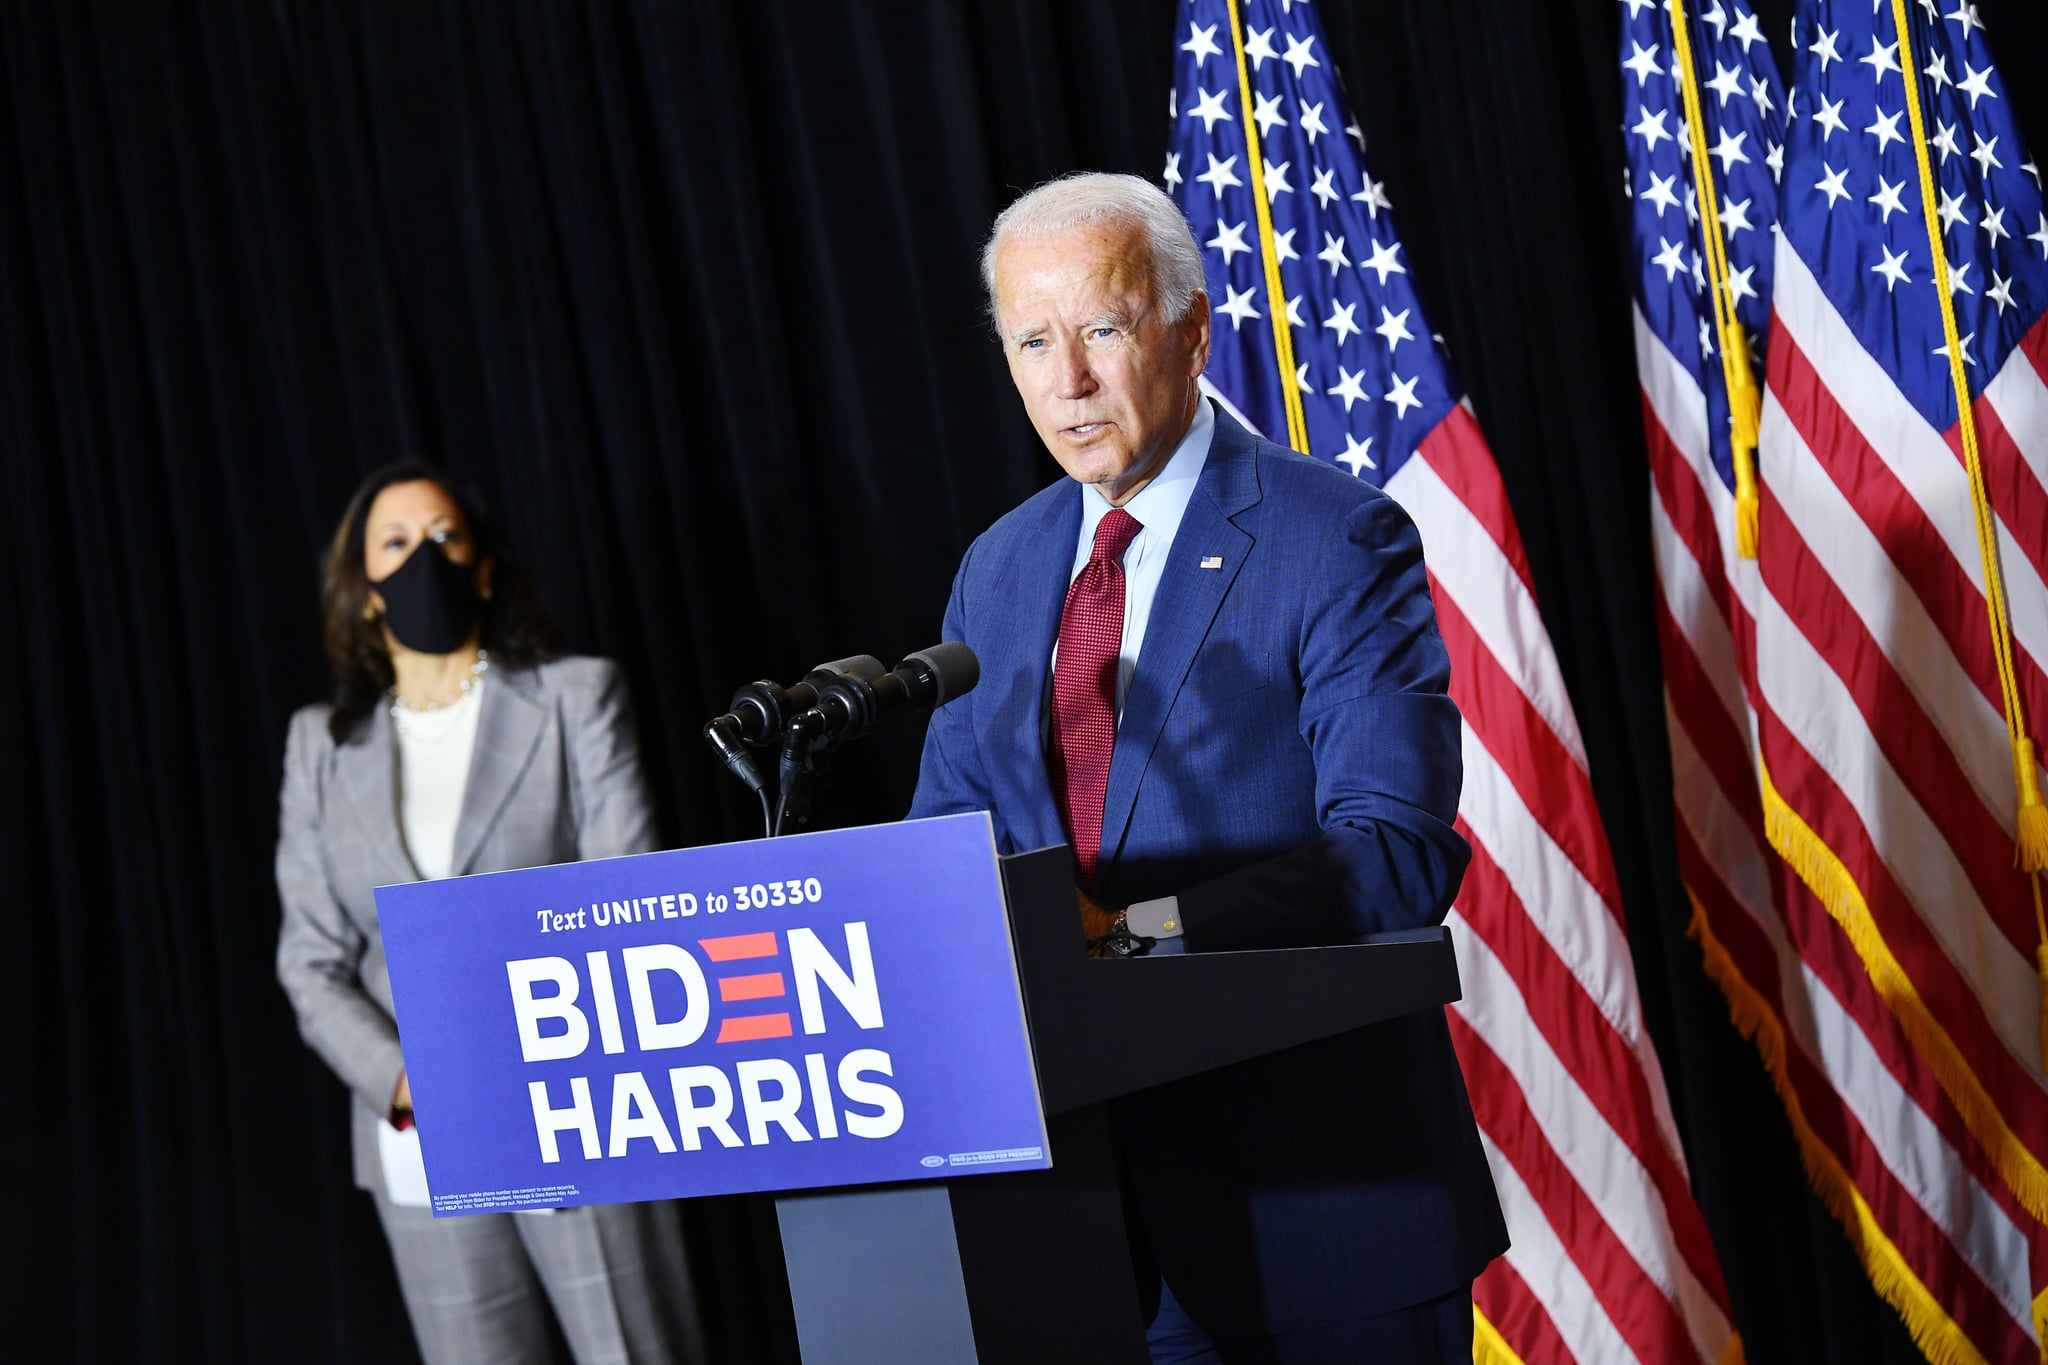 Democratic presidential nominee, former US Vice President Joe Biden (R), and vice presidential running mate, US Senator Kamala Harris, hold a press conference after receiving a briefing on COVID-19 in Wilmington, Delaware, on August 13, 2020. (Photo by MANDEL NGAN / AFP) (Photo by MANDEL NGAN/AFP via Getty Images)